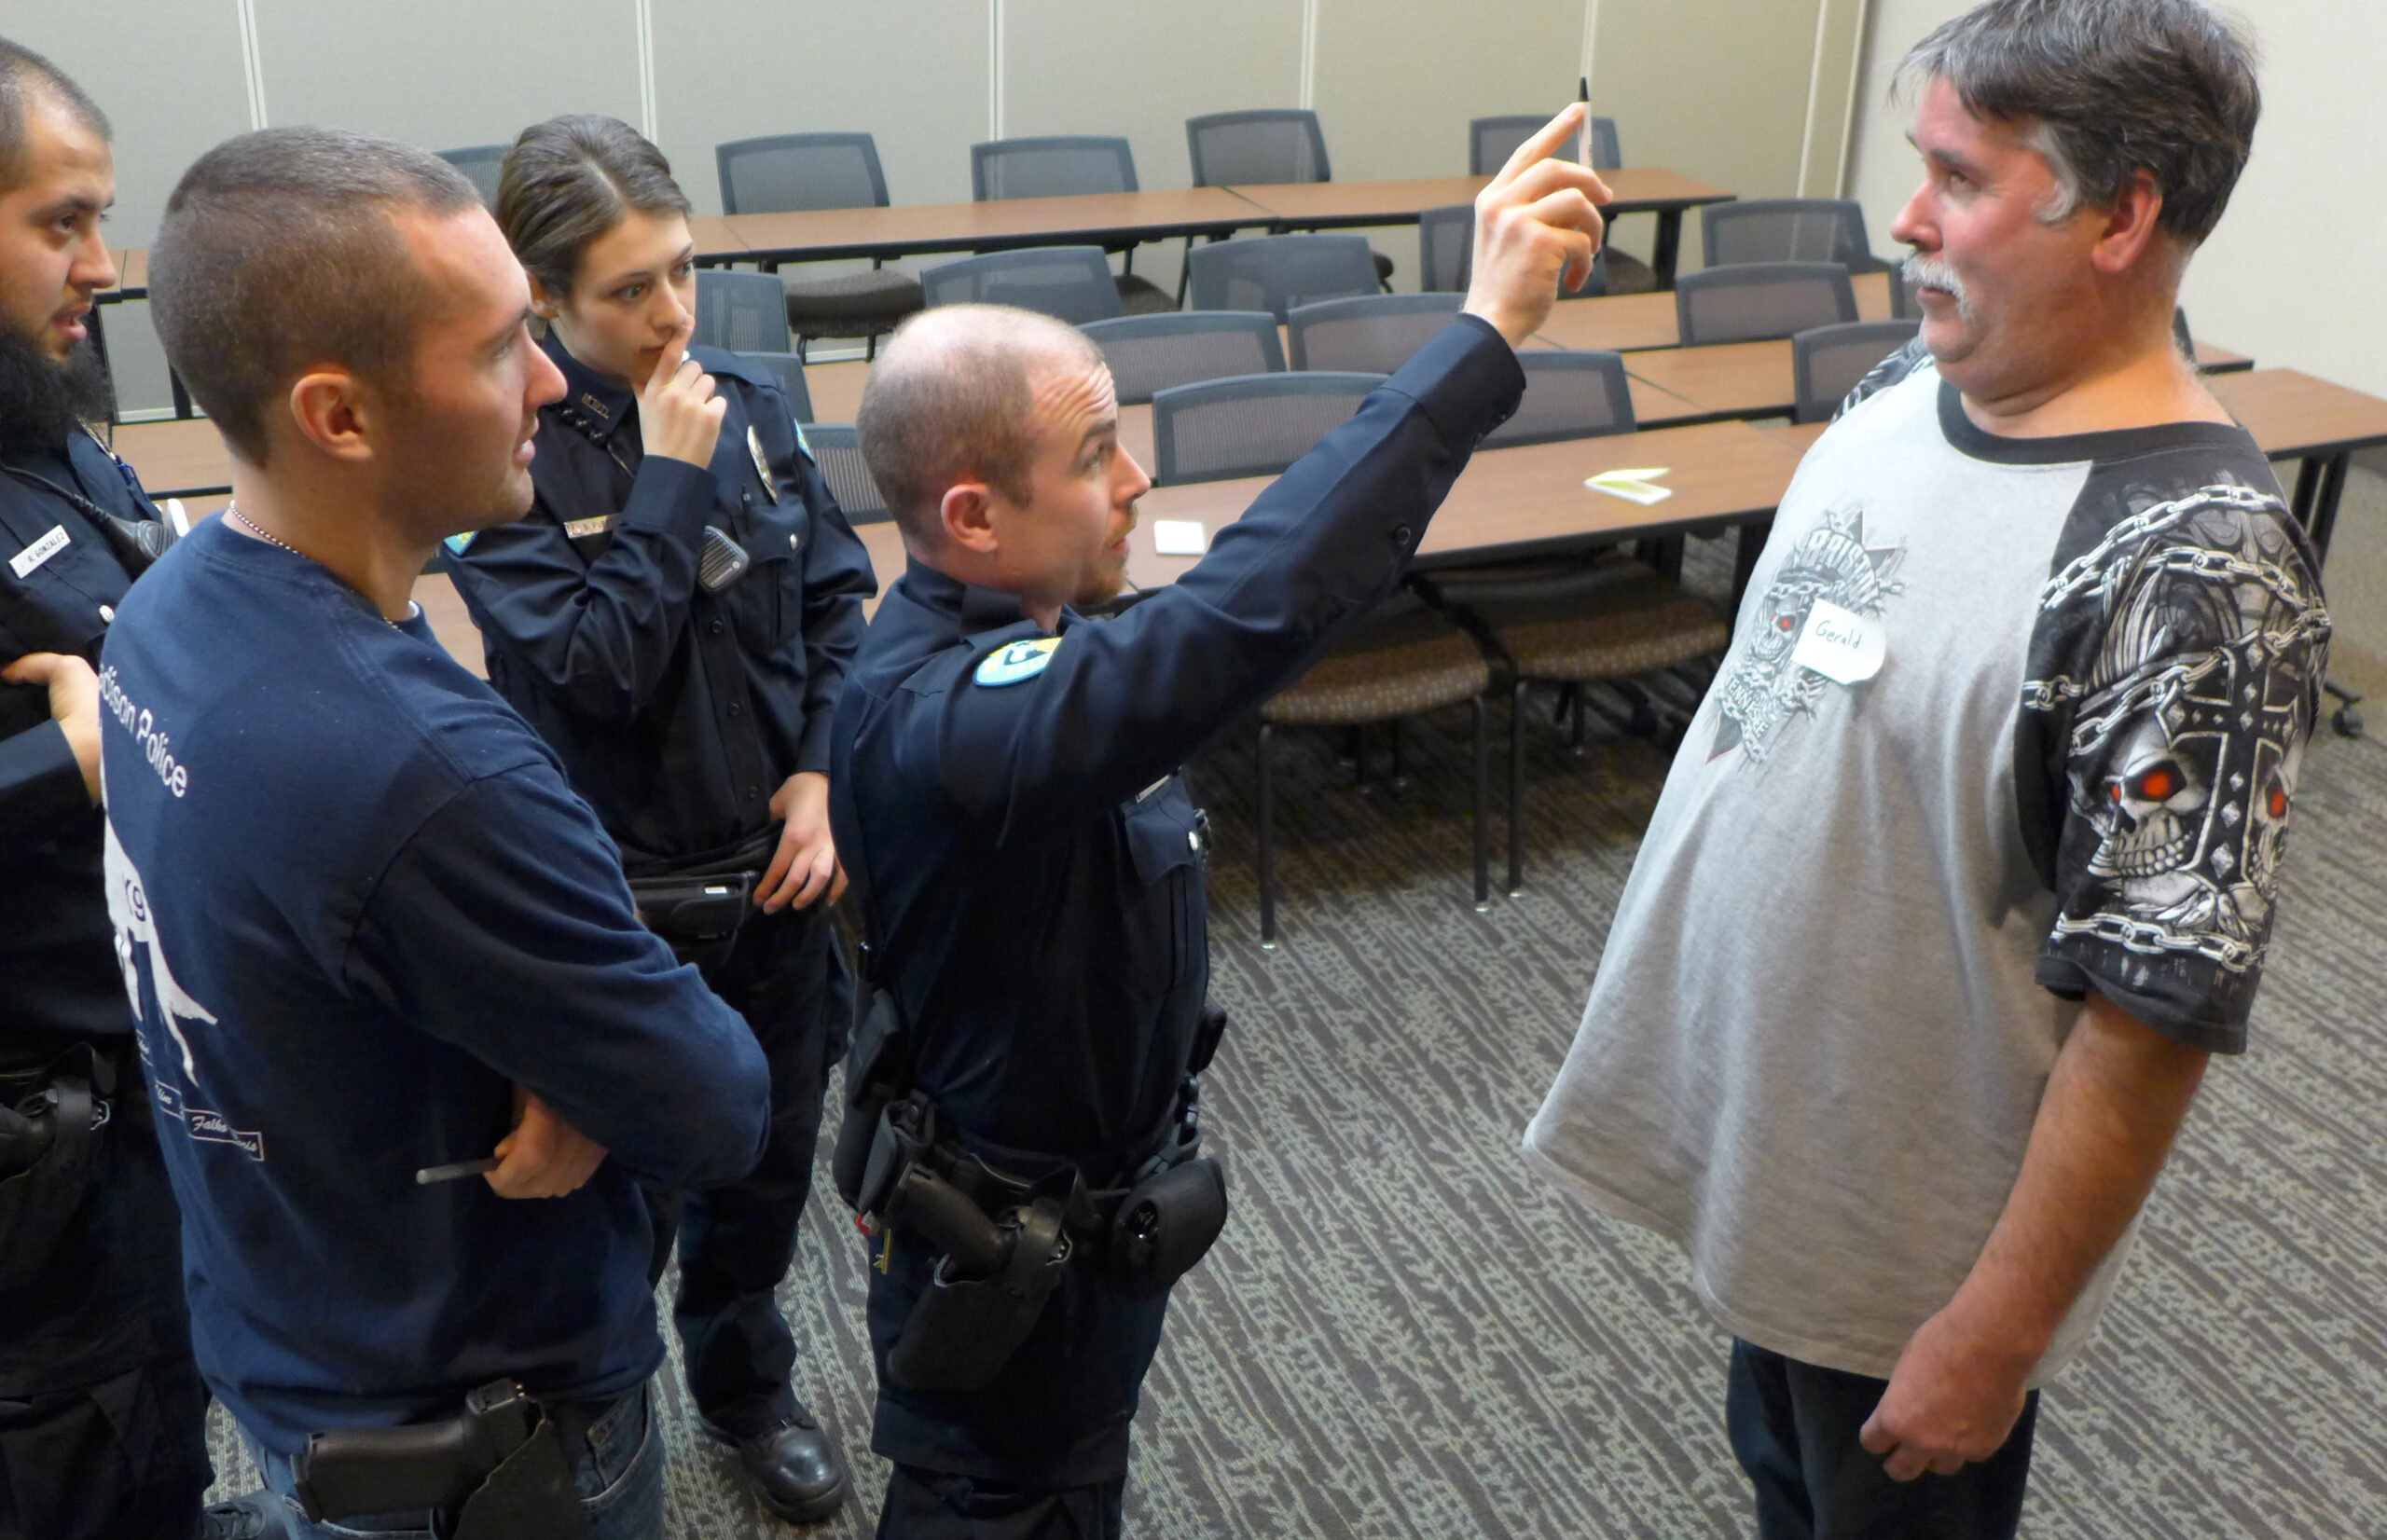 Recruit Nick Cleary practices field sobriety testing on a volunteer who is drunk.